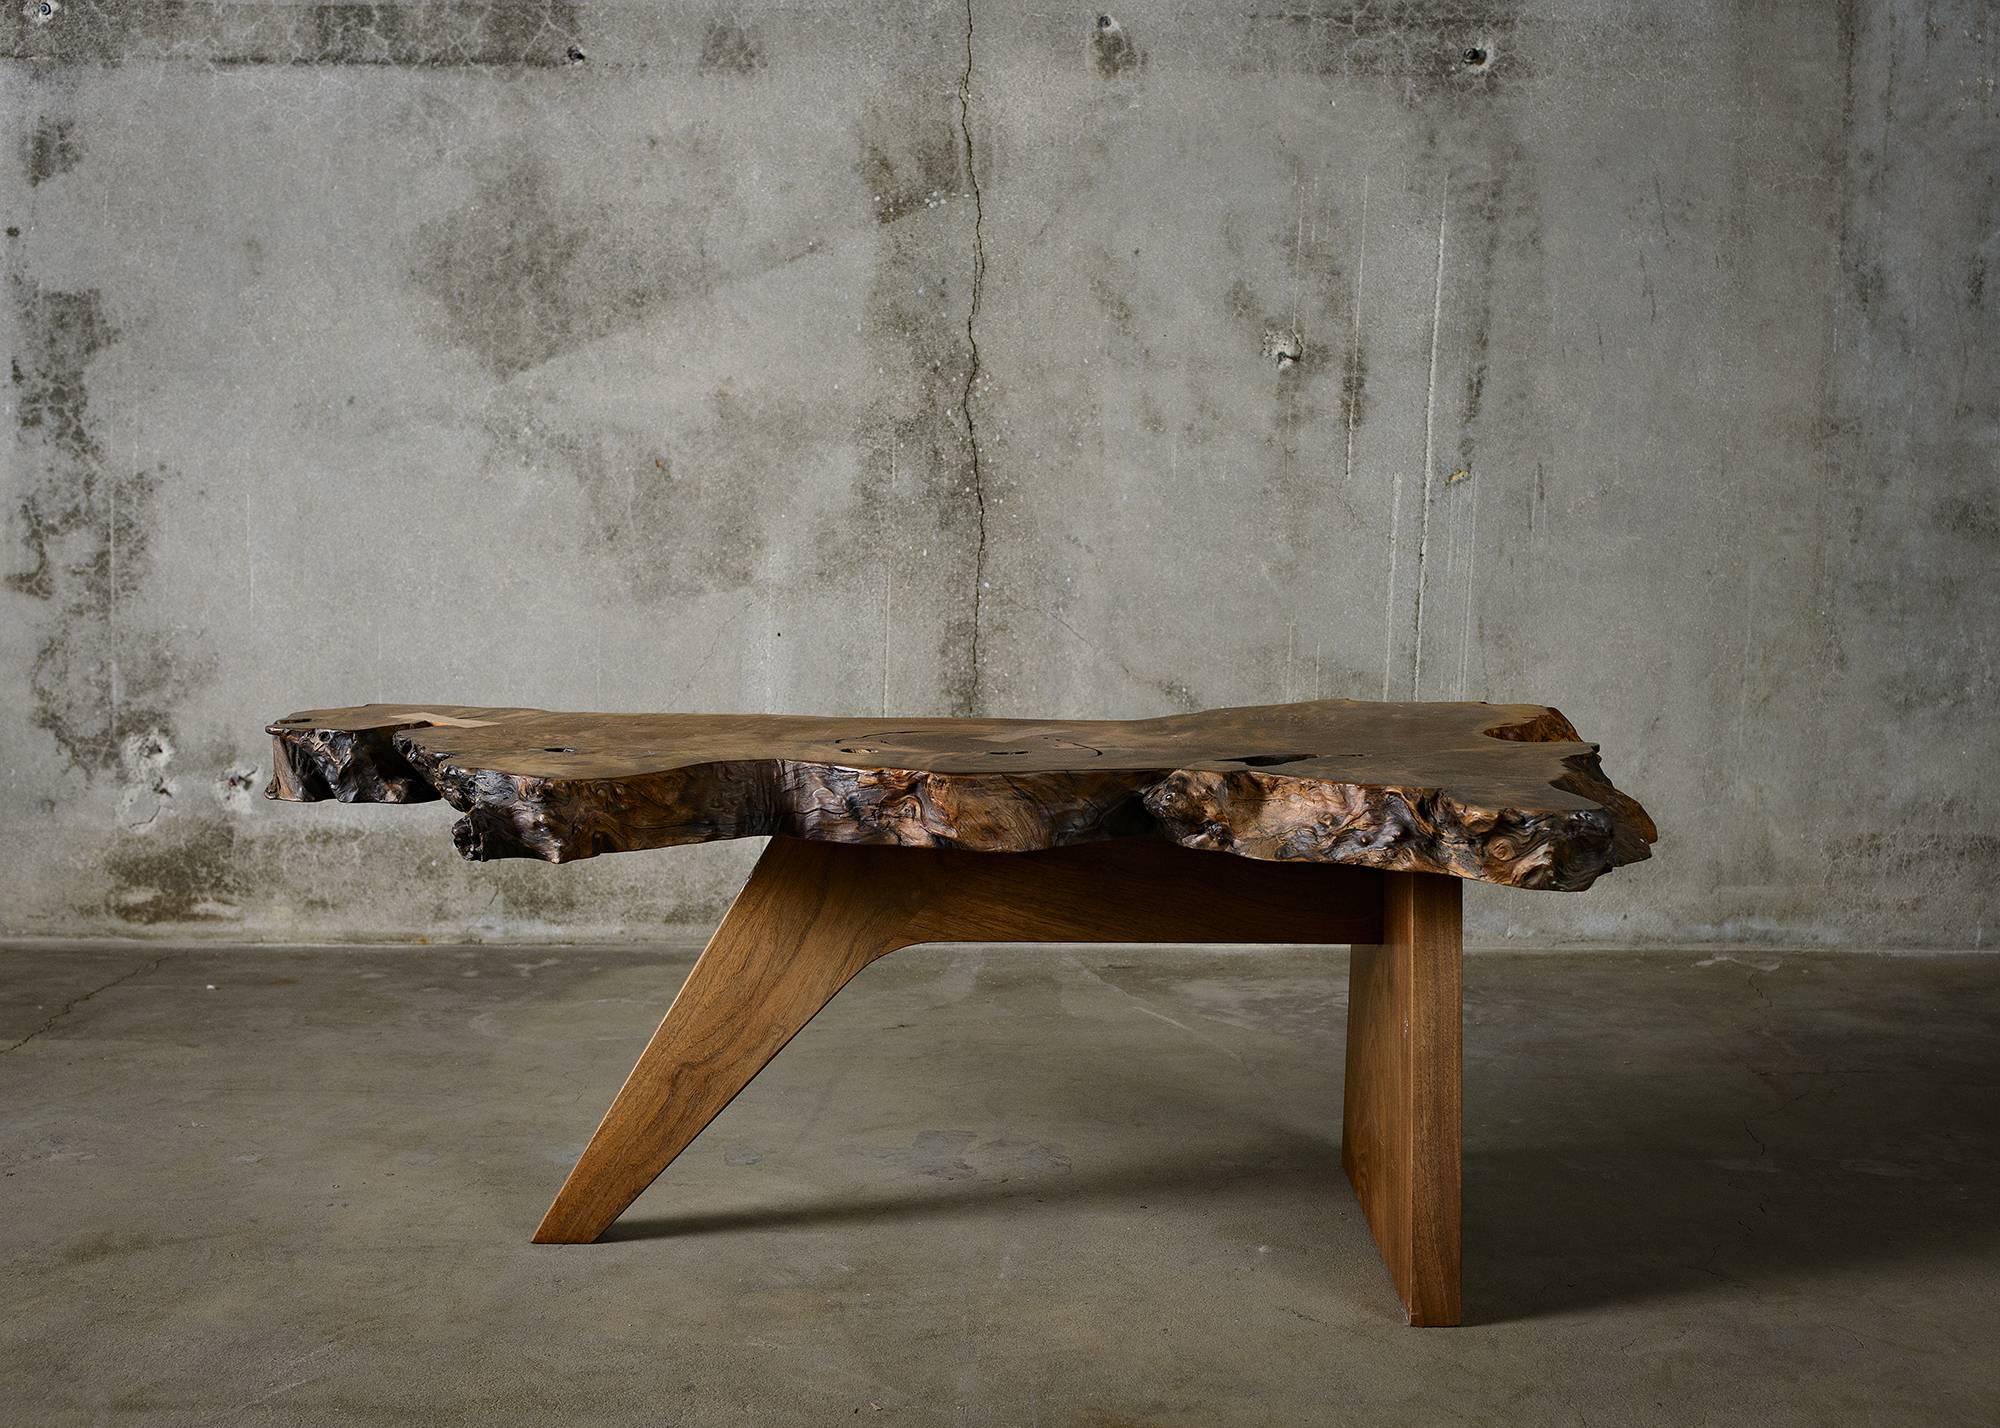 Never leaving any part of the wood to waste, Mira Nakashima masterfully crafts this table from burl wood, the rounded knotty growth on a tree, into a classic piece that is modern with bold hints of the woods natural form.
 